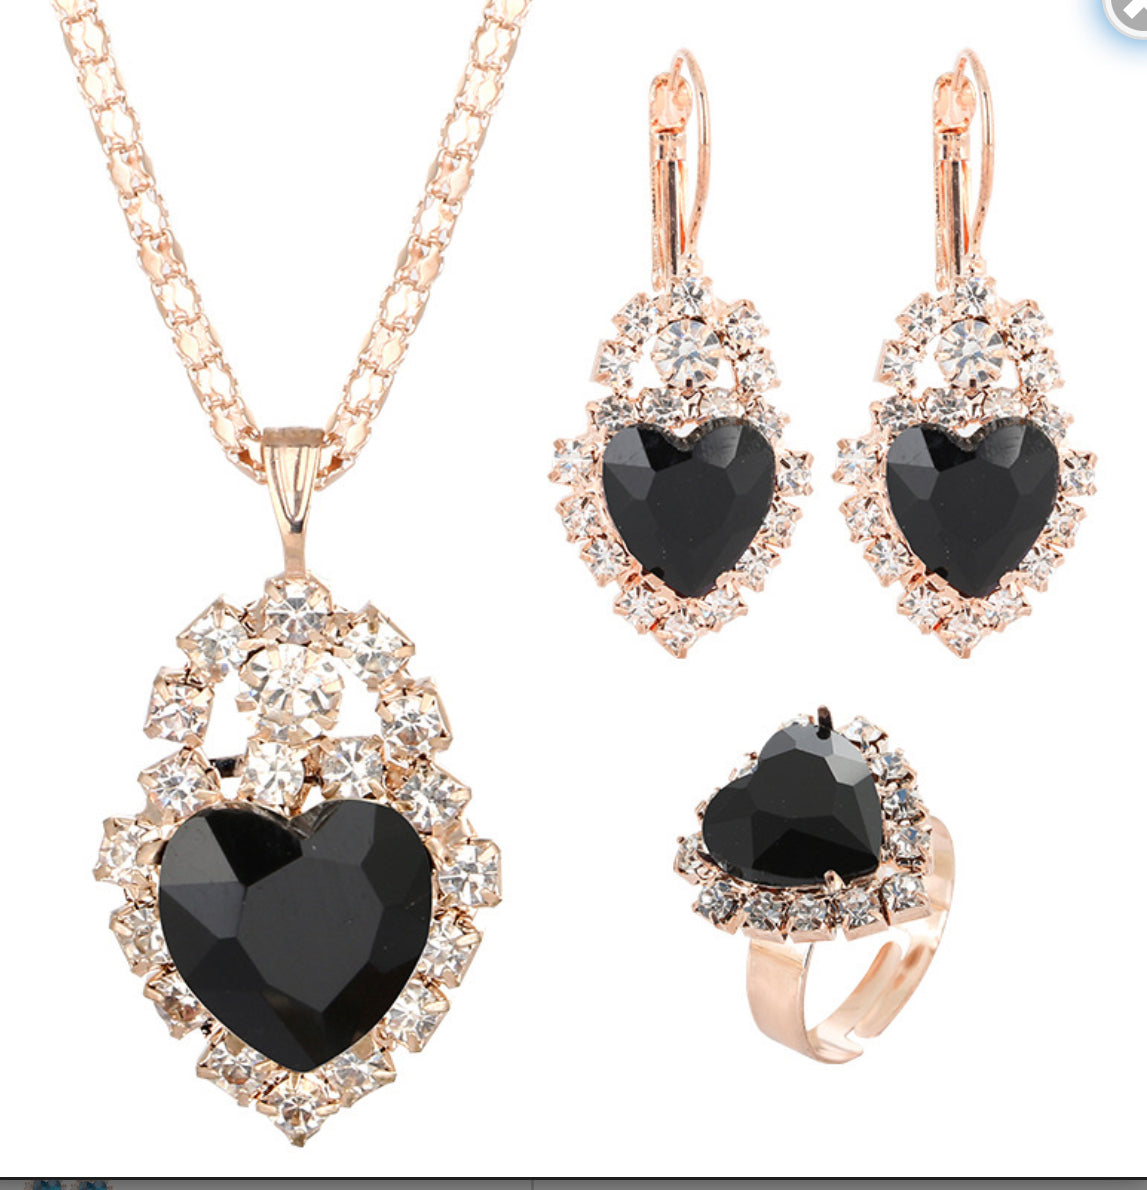 Black crystal rhinestone hearts 4 pc set gold necklace earrings ring set